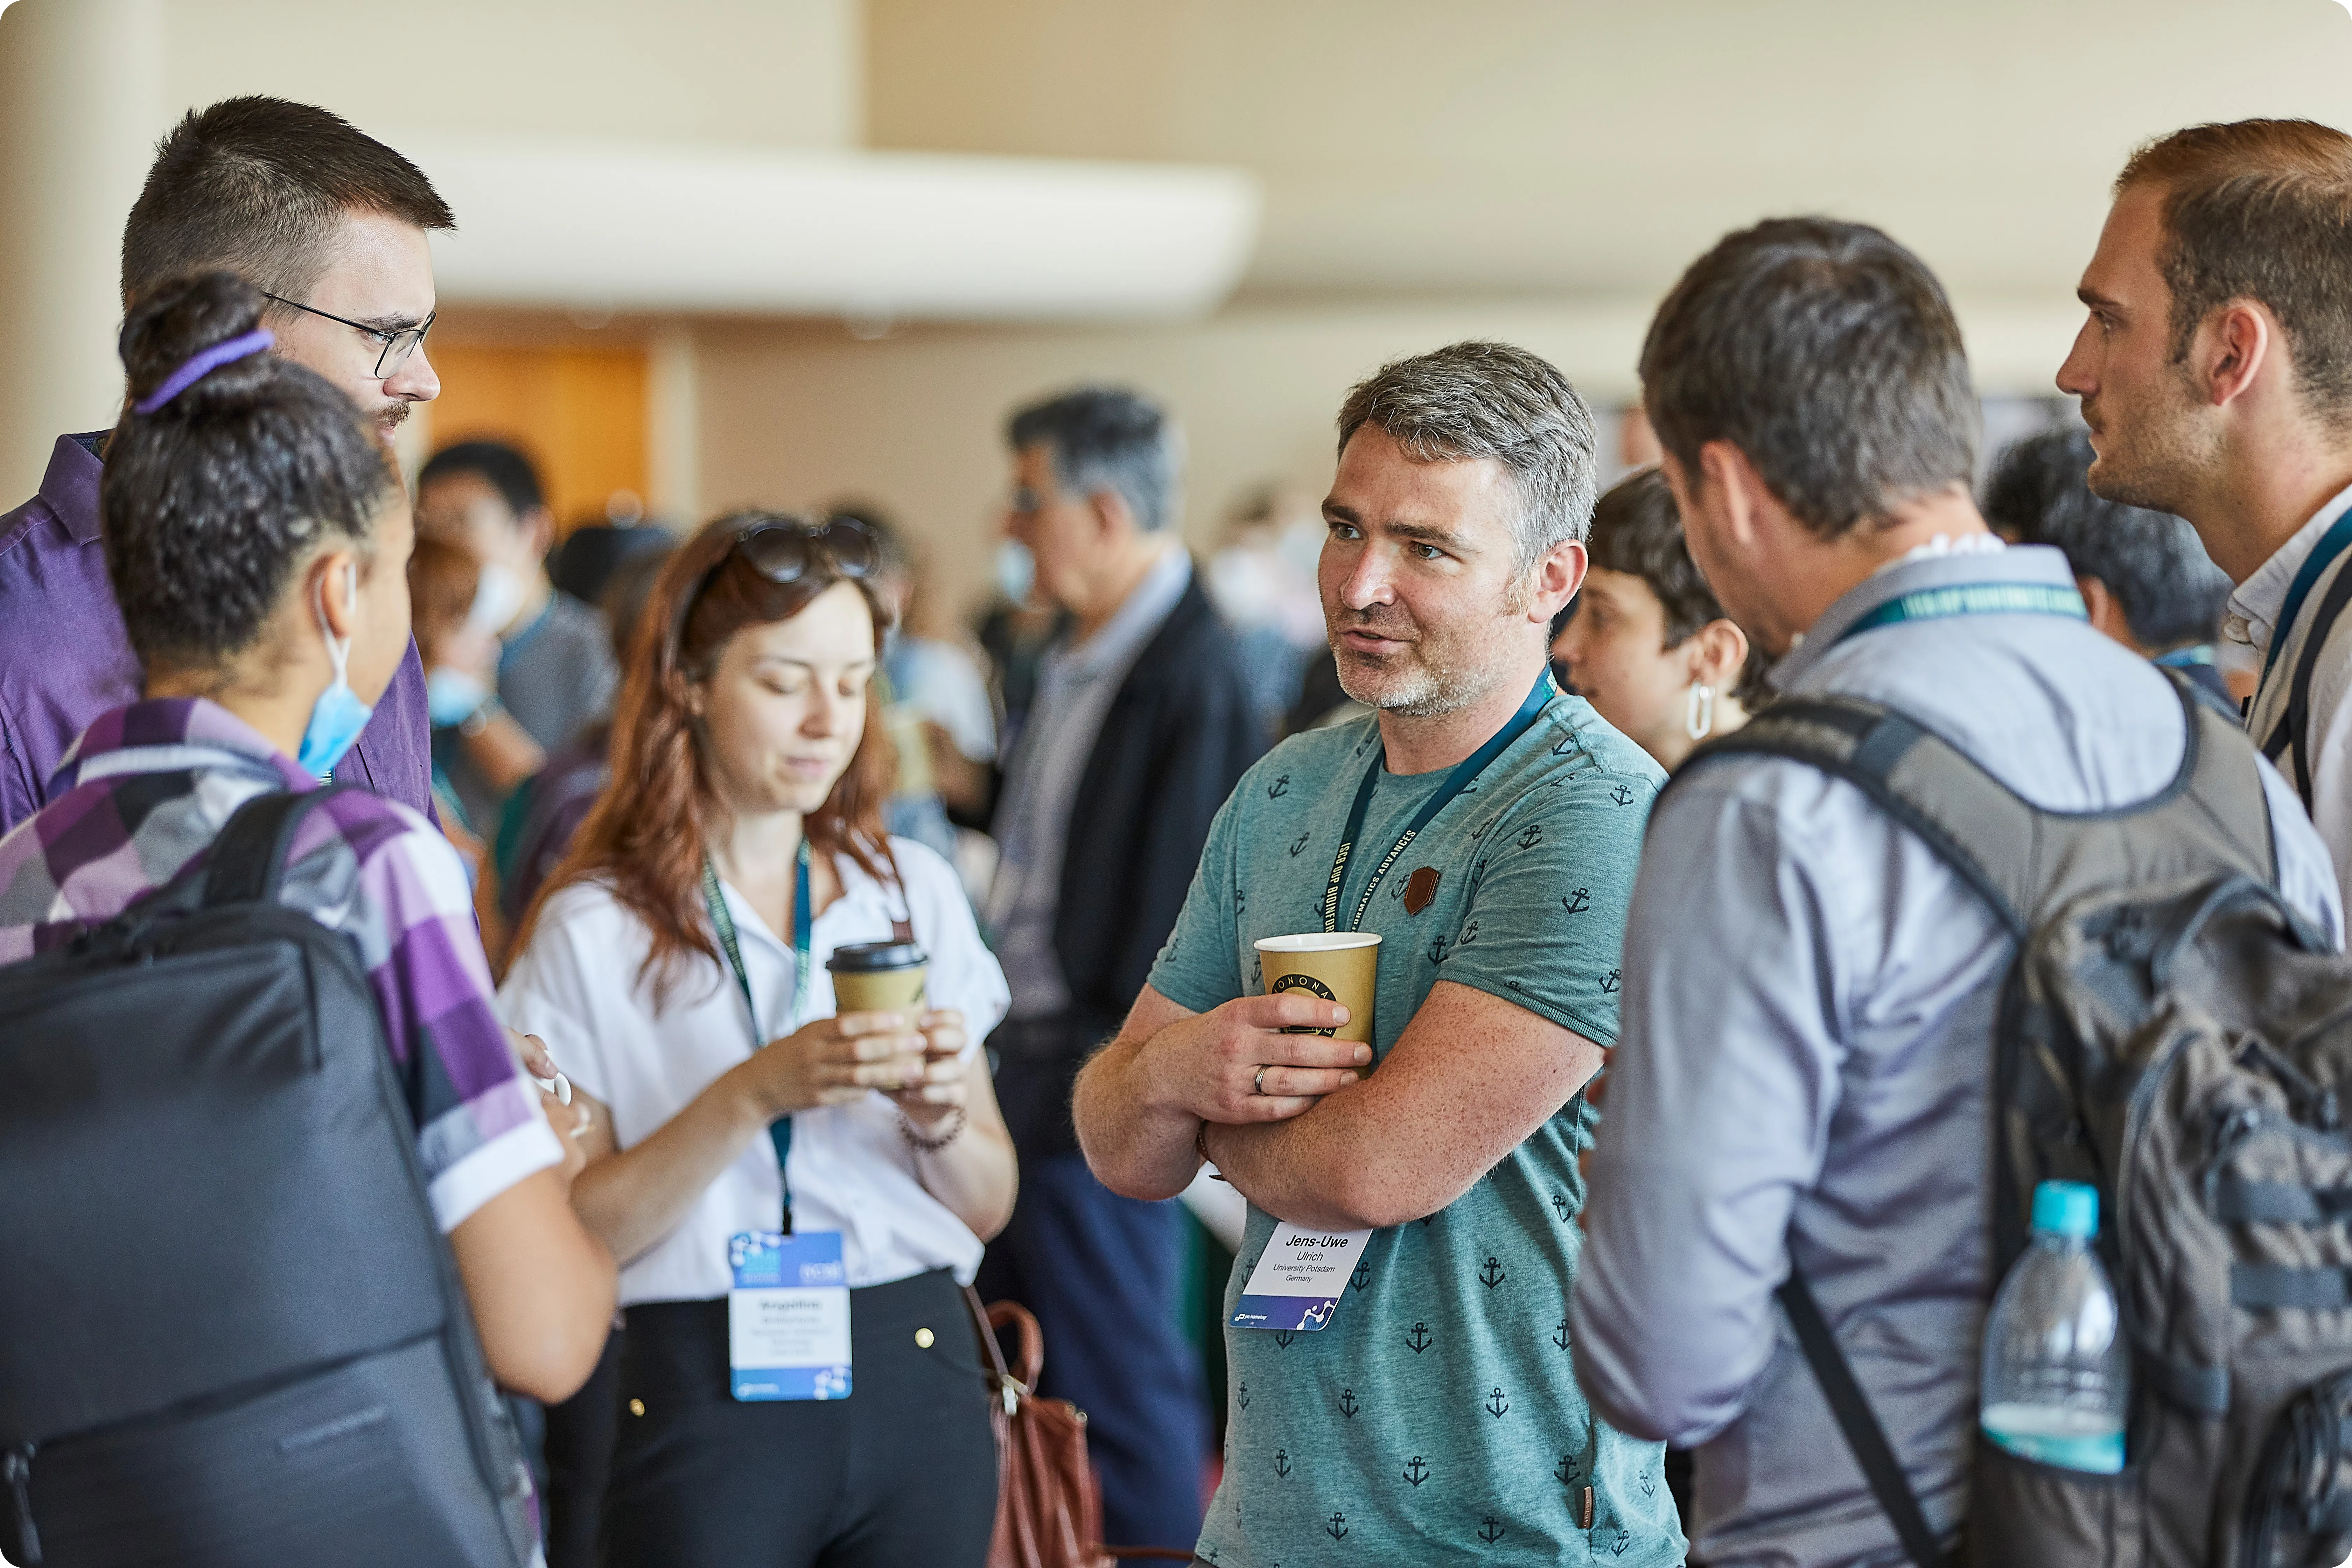 Attendees enjoy coffee at the ISMB 2022 conference